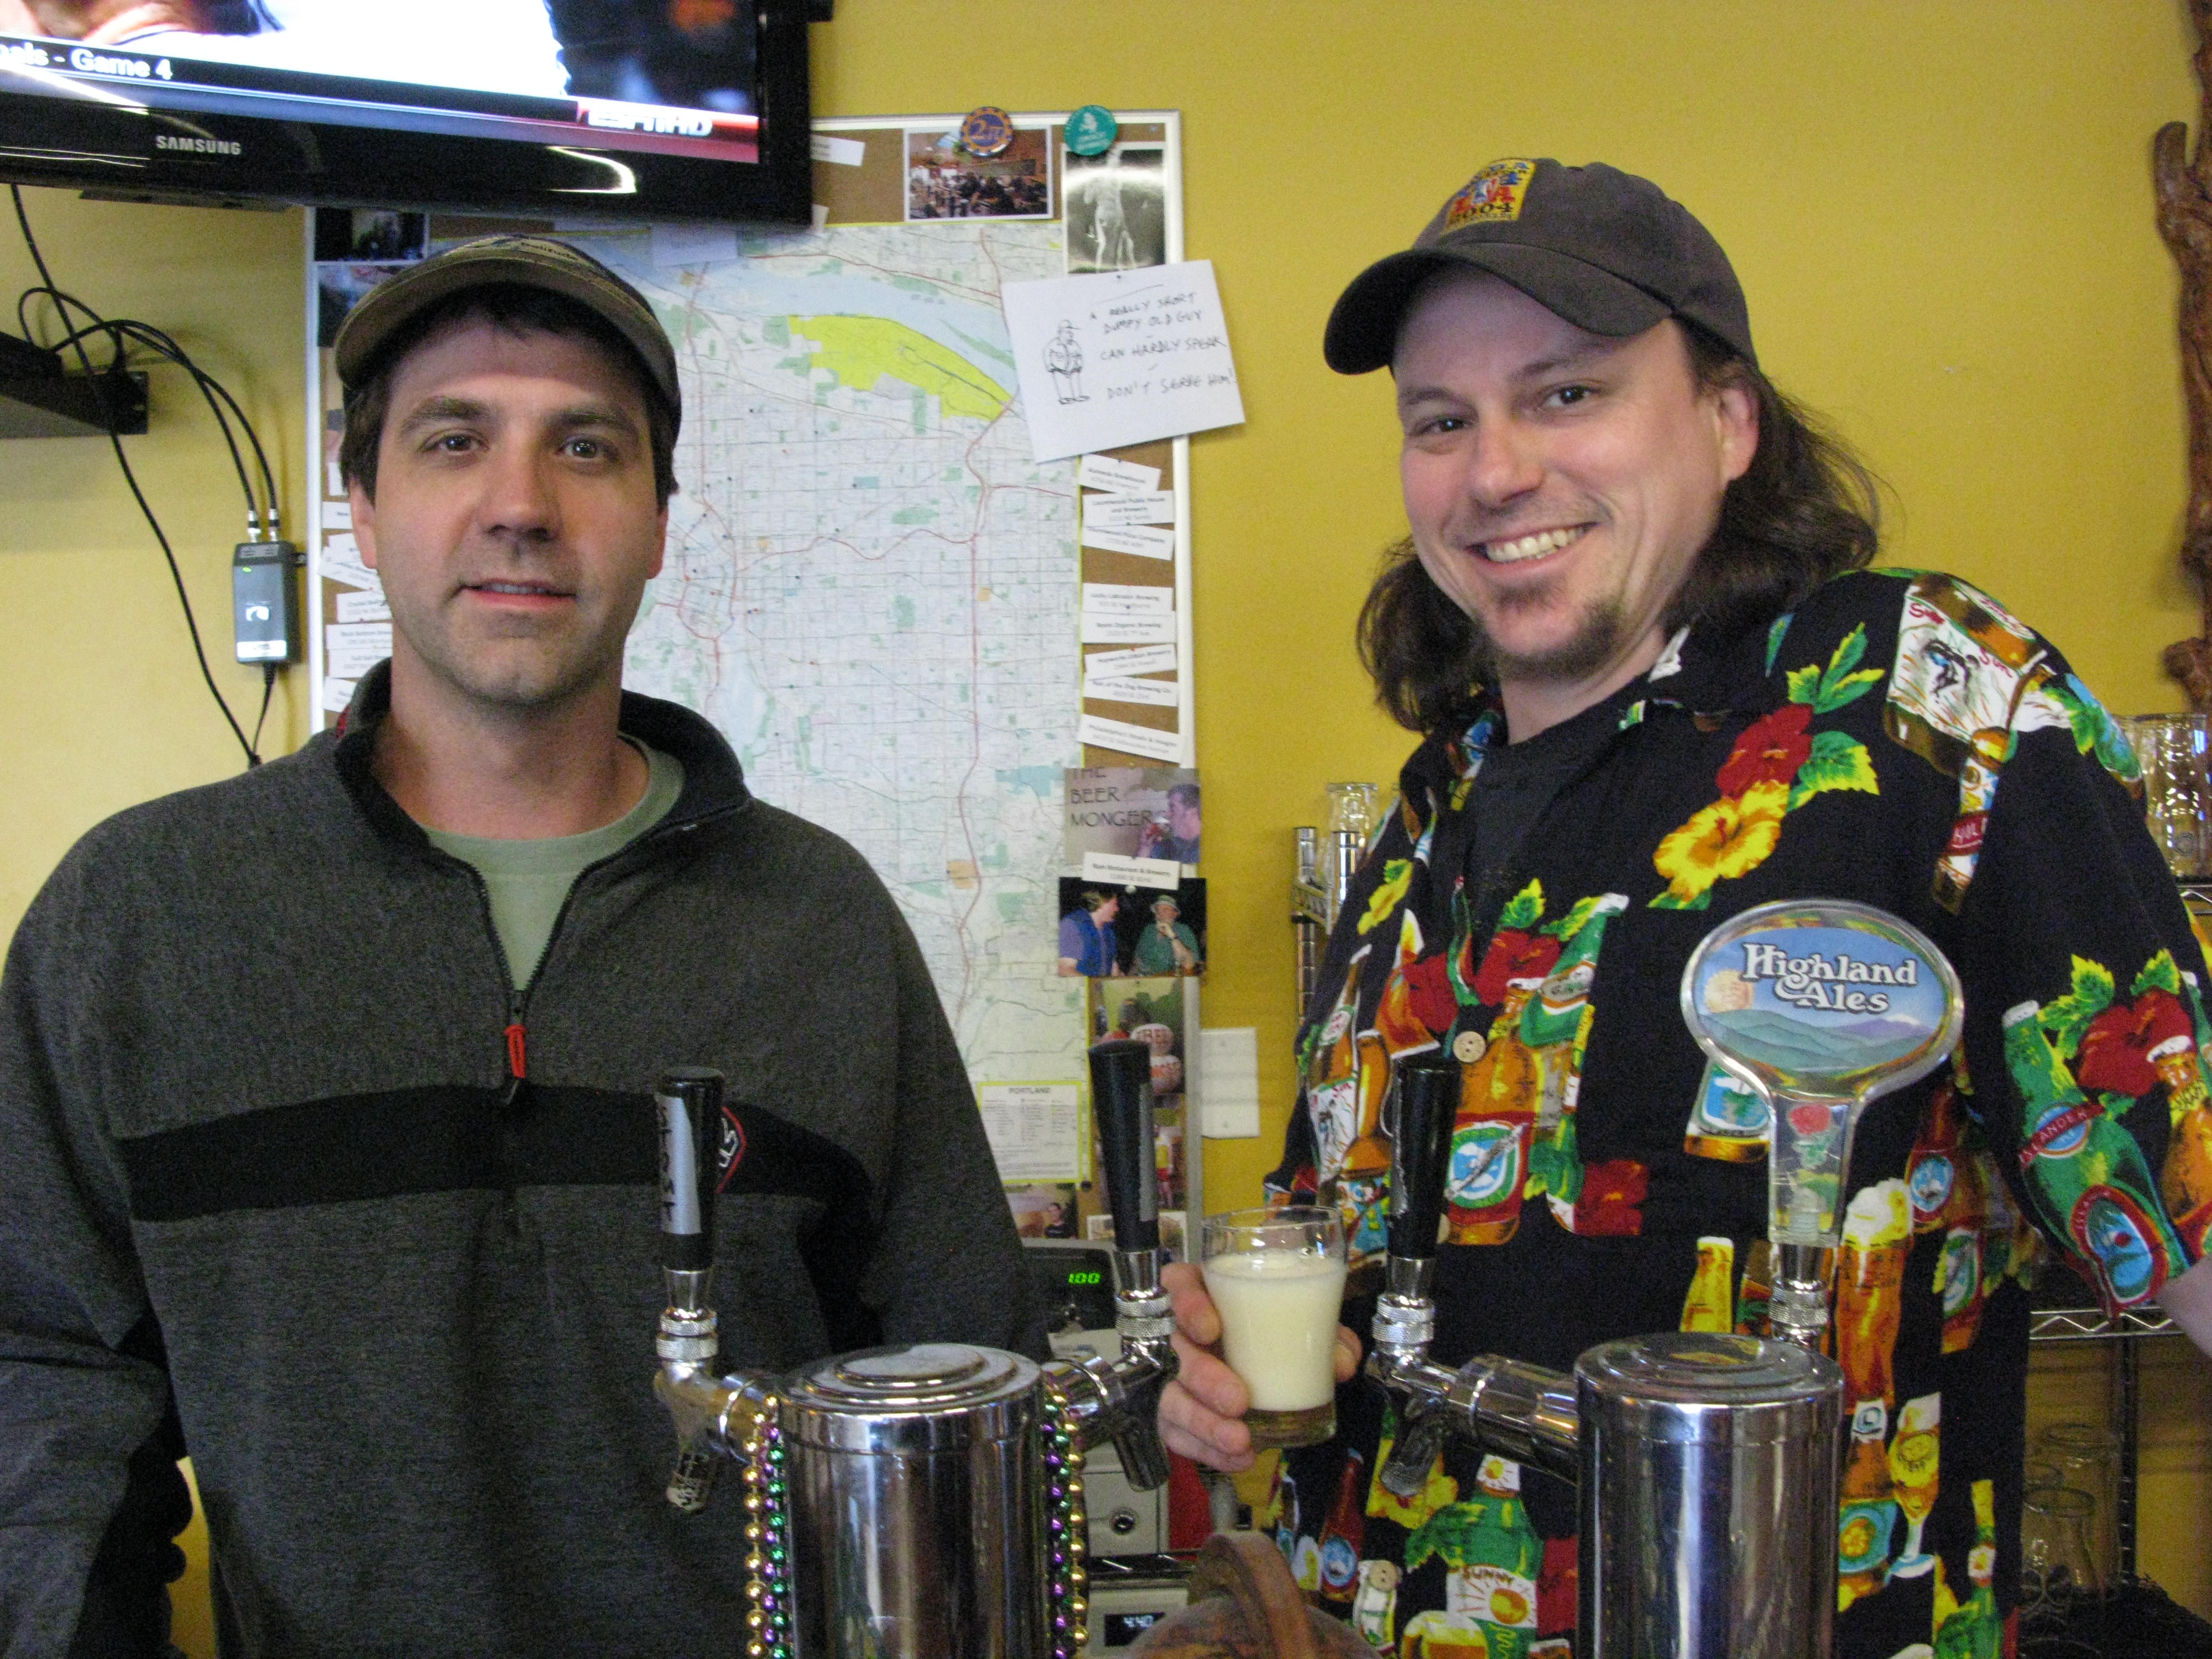 Craig and Sean started The BeerMongers in 2009, and Sean later bought out his partner. (FoystonFoto)